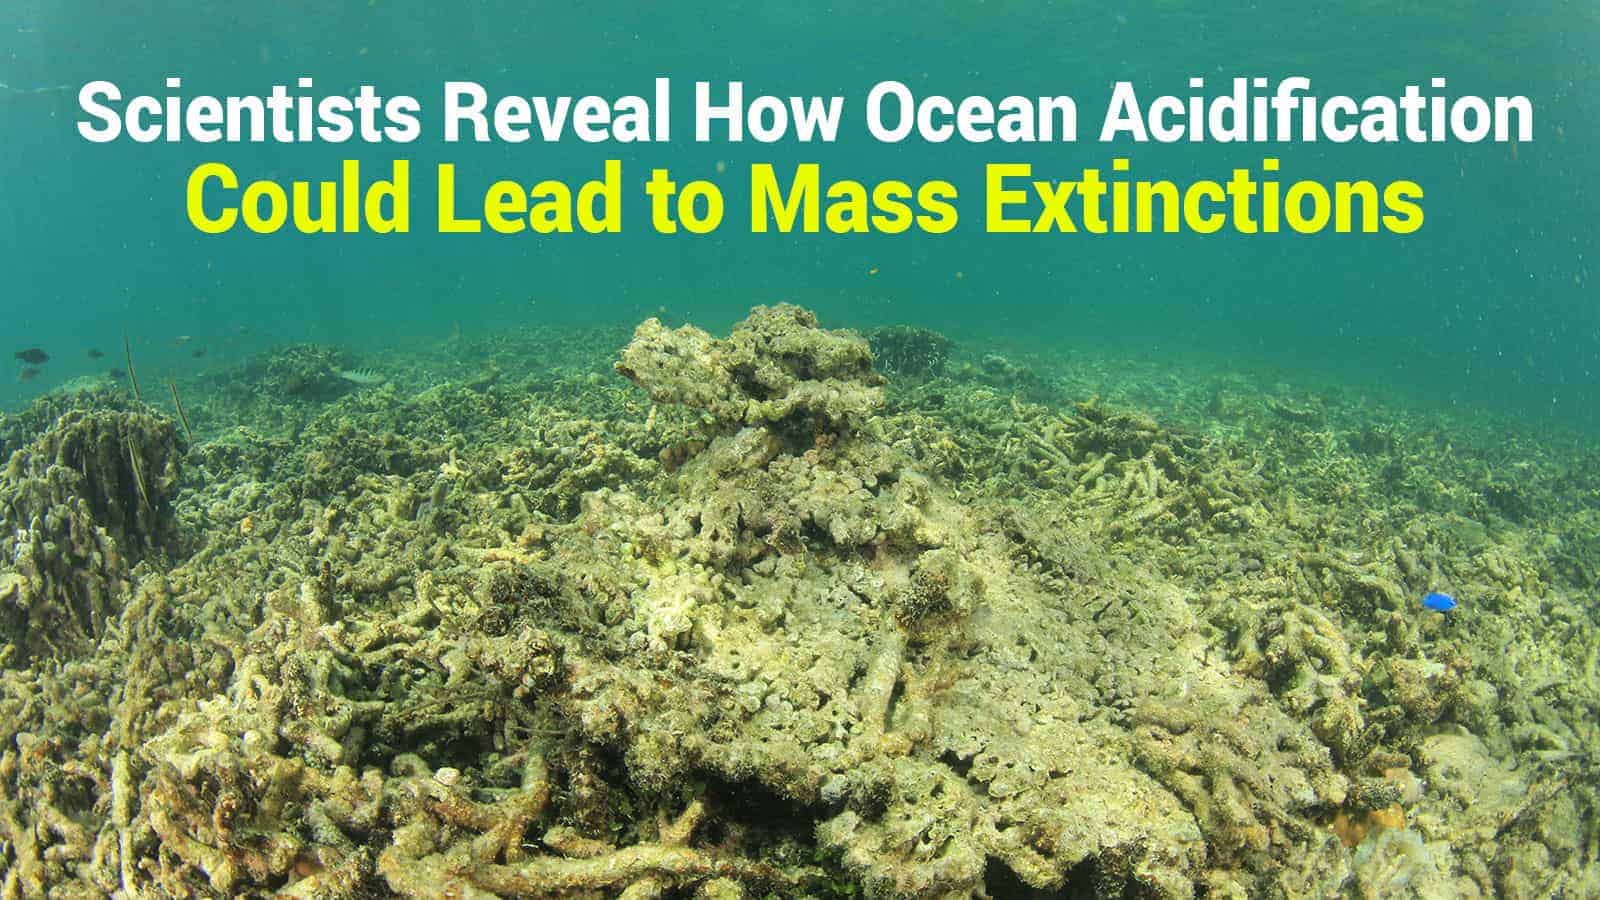 Scientists Reveal How Ocean Acidification Could Lead to Mass Extinctions